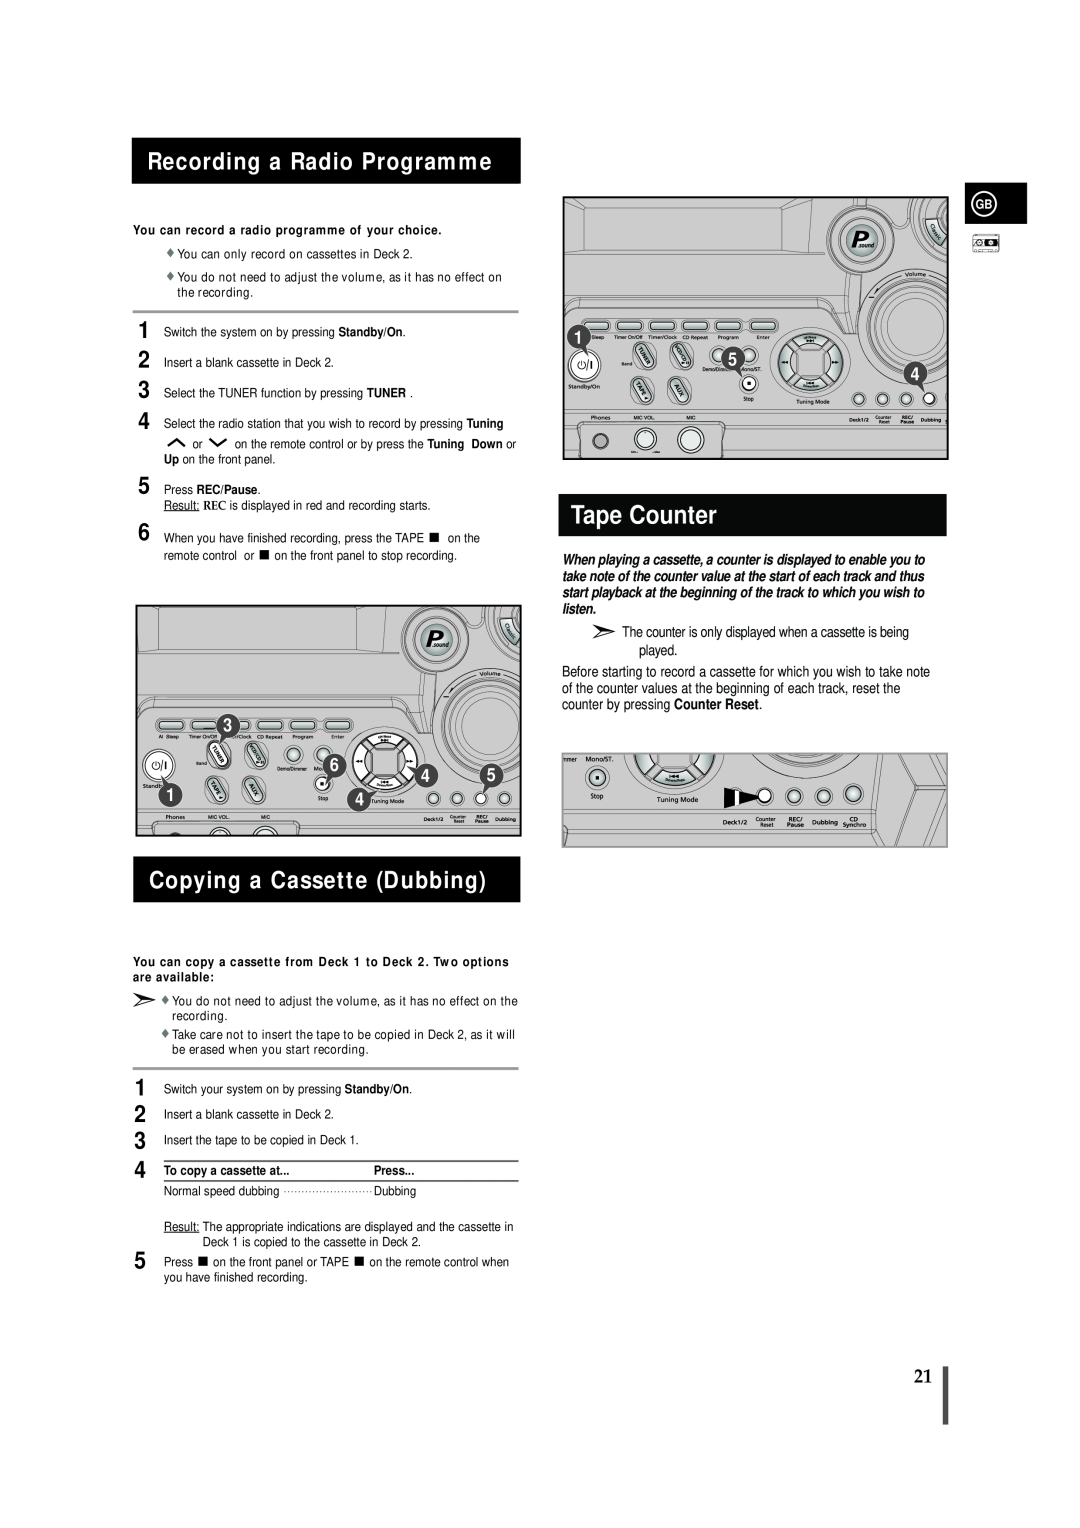 Samsung MAX-VB450 instruction manual Recording a Radio Programme, Copying a Cassette Dubbing, Tape Counter 